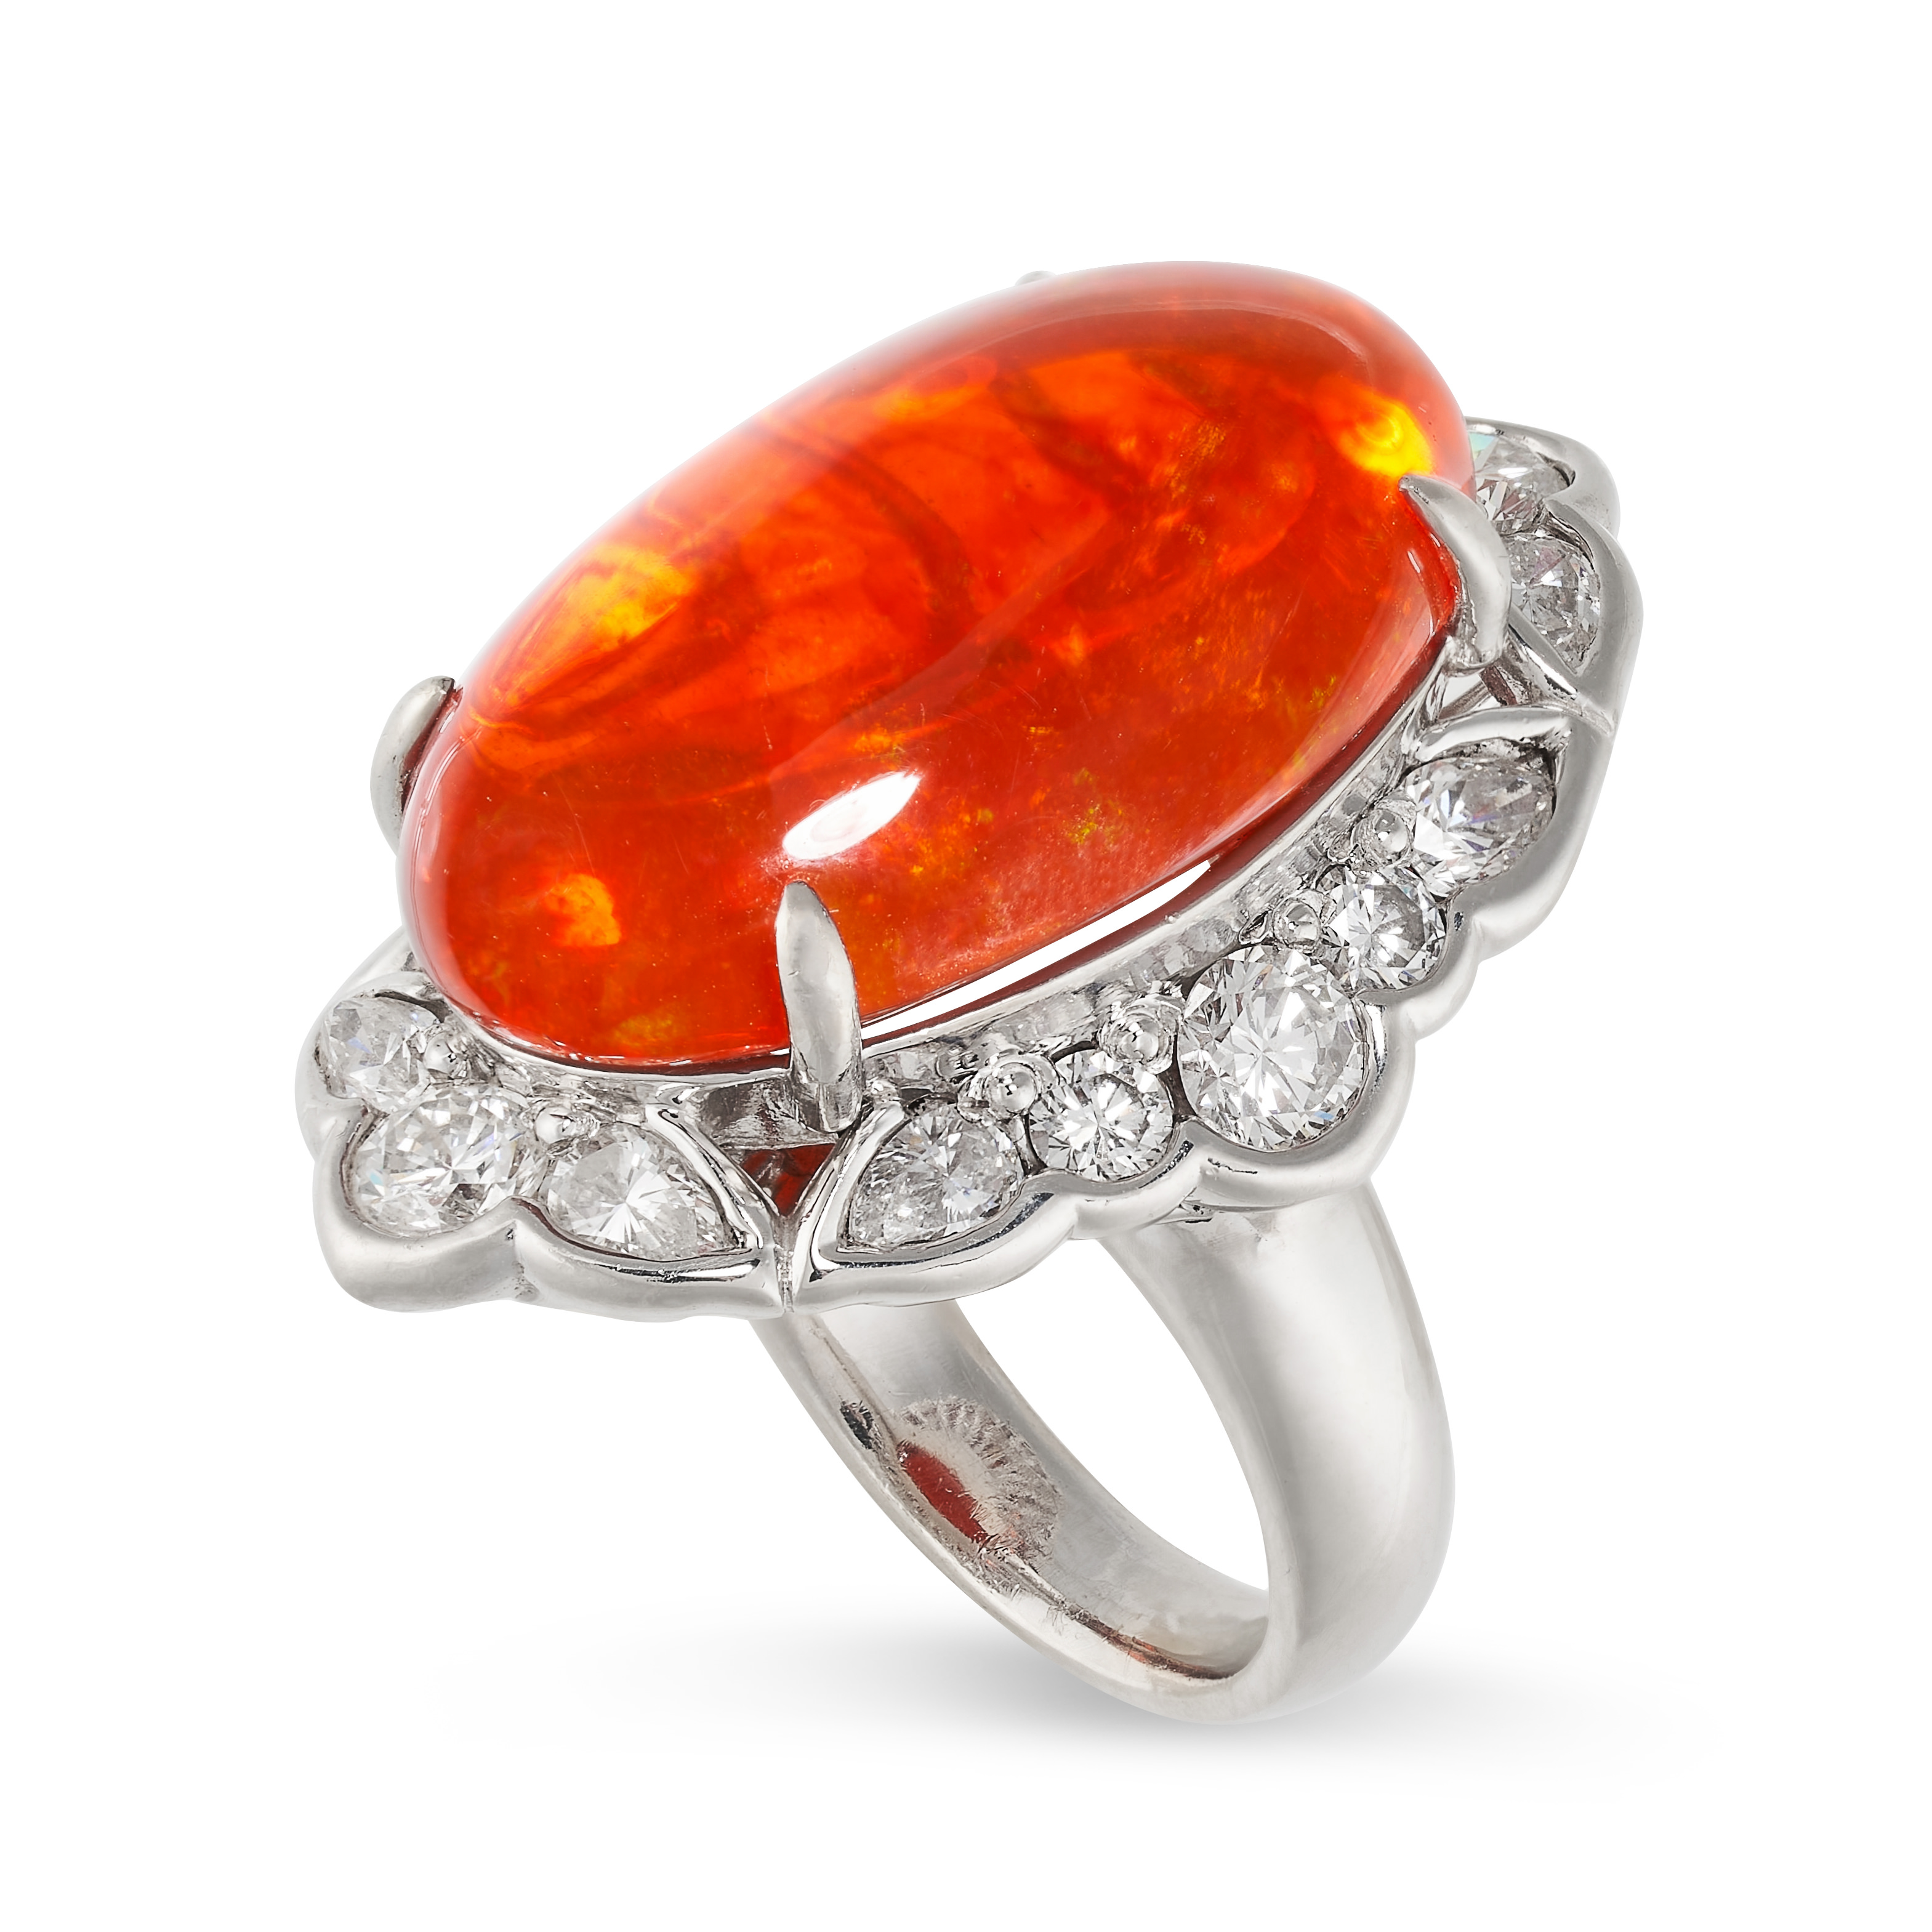 AN EXCEPTIONAL FIRE OPAL AND DIAMOND NAVETTE-SHAPED CLUSTER RING  Oval cabochon fire opal, - Image 2 of 2